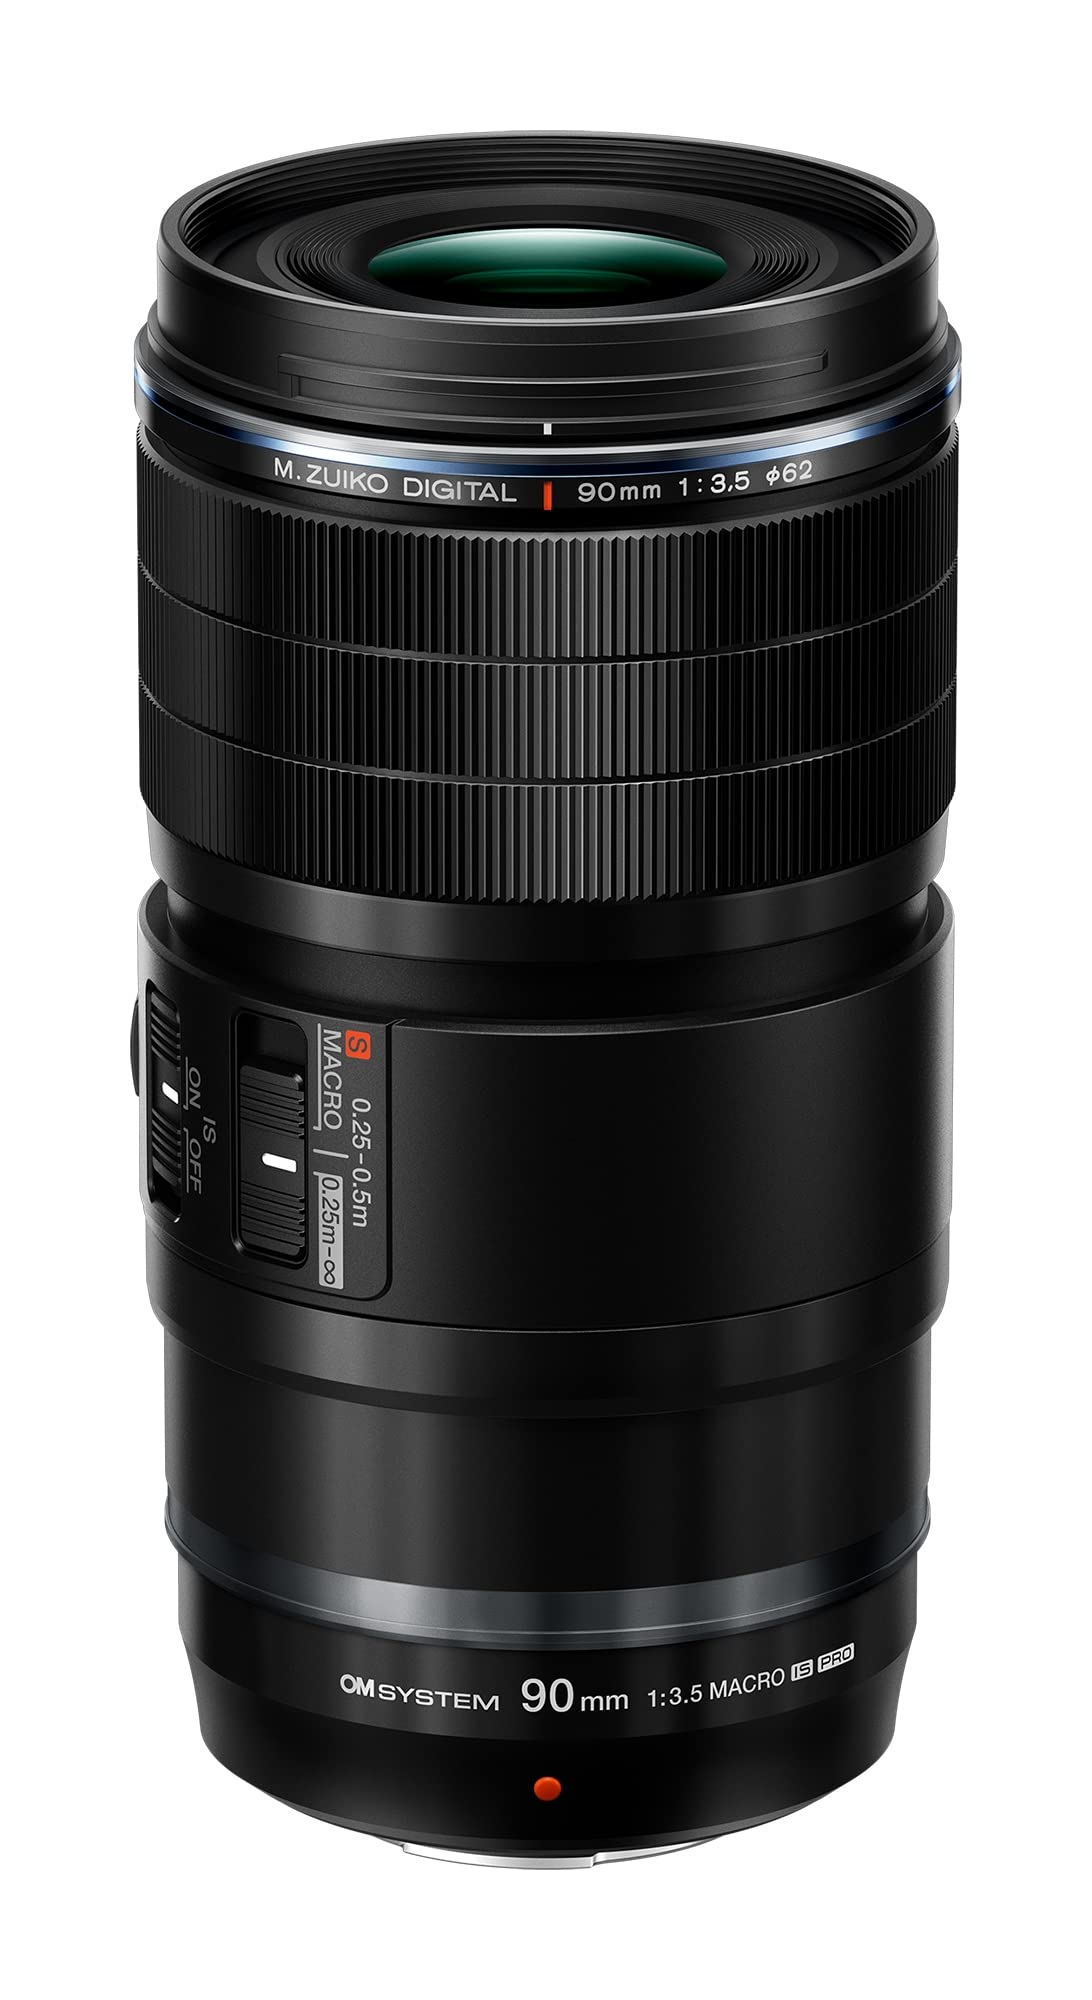 OM Digital Solutions OM System M.Zuiko Digital ED 90mm F3.5 Macro is PRO for Micro Four Thirds System Camera, Weather Sealed Design, MF Clutch, Fluorine Coating, Compatible with Teleconverter